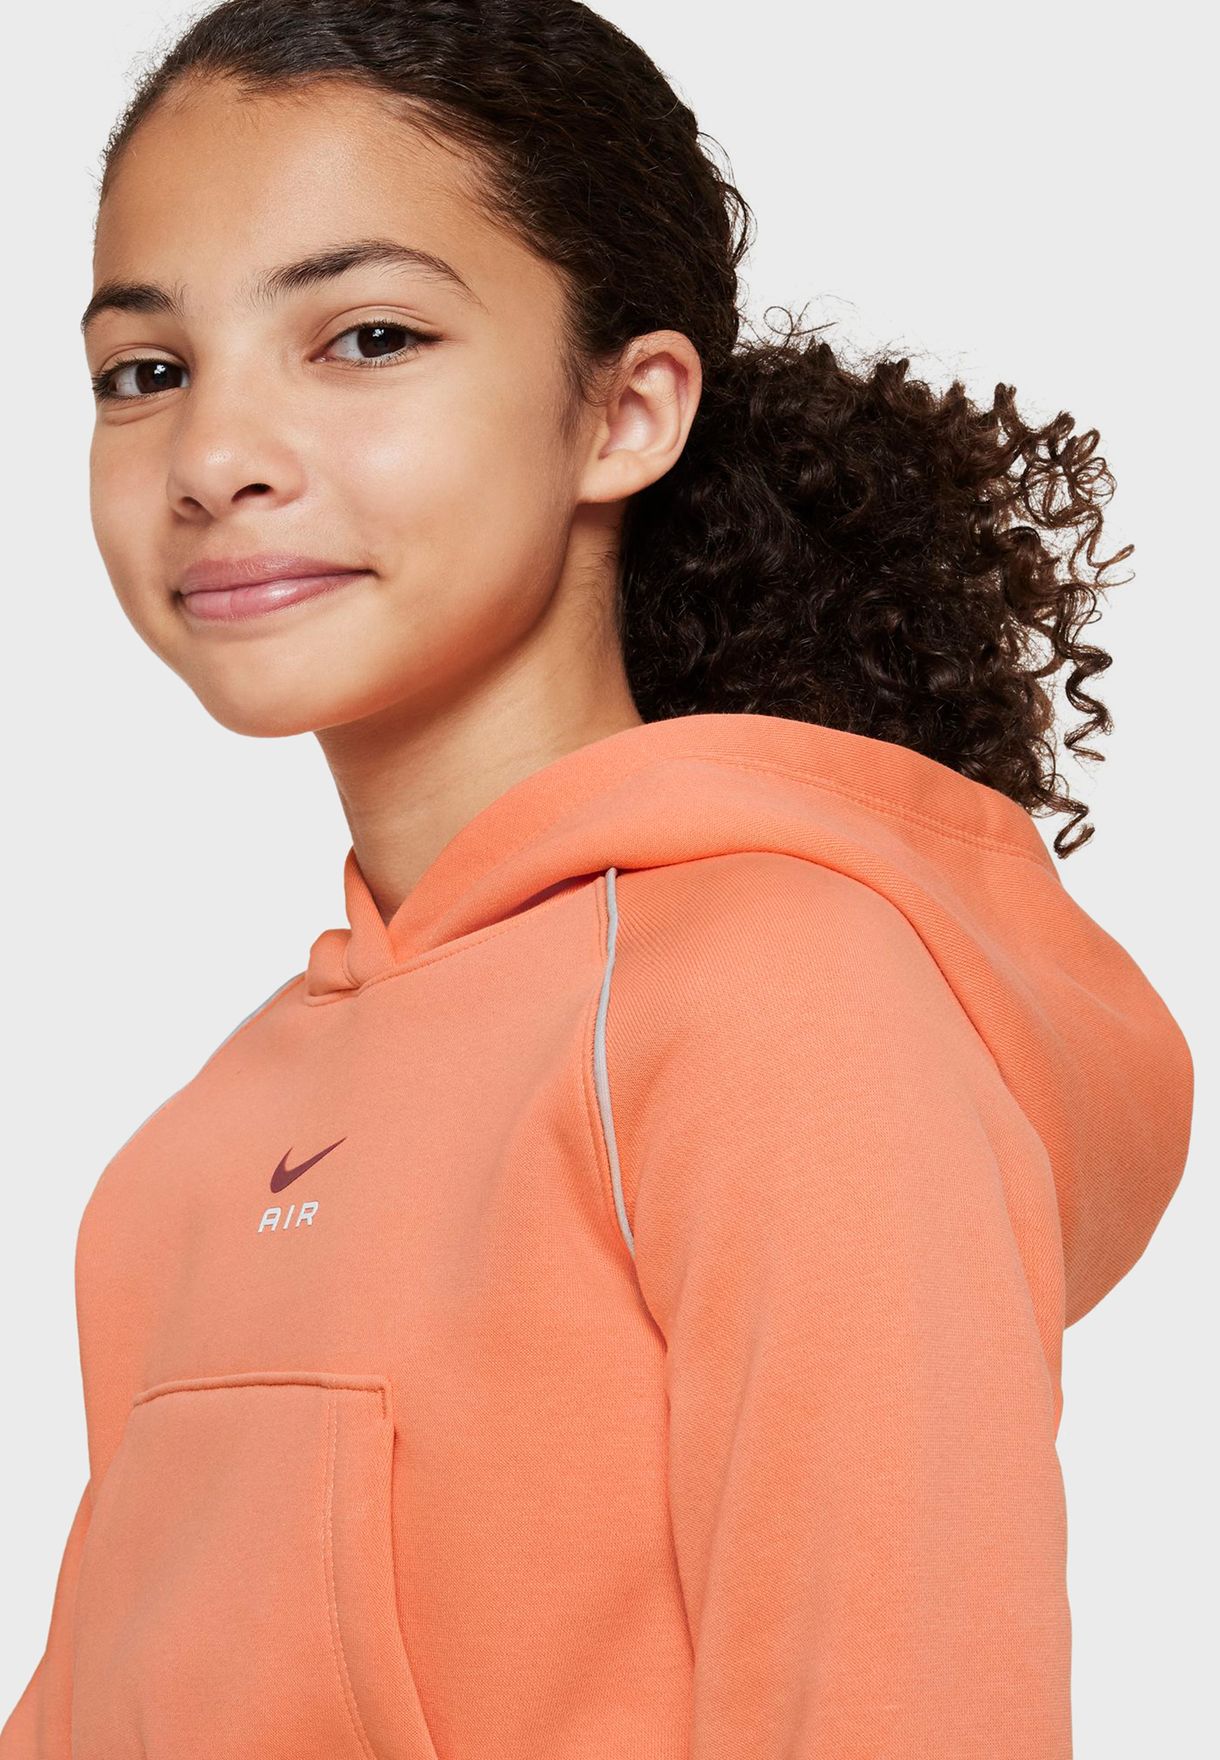 Youth Nsw Air Hoodie